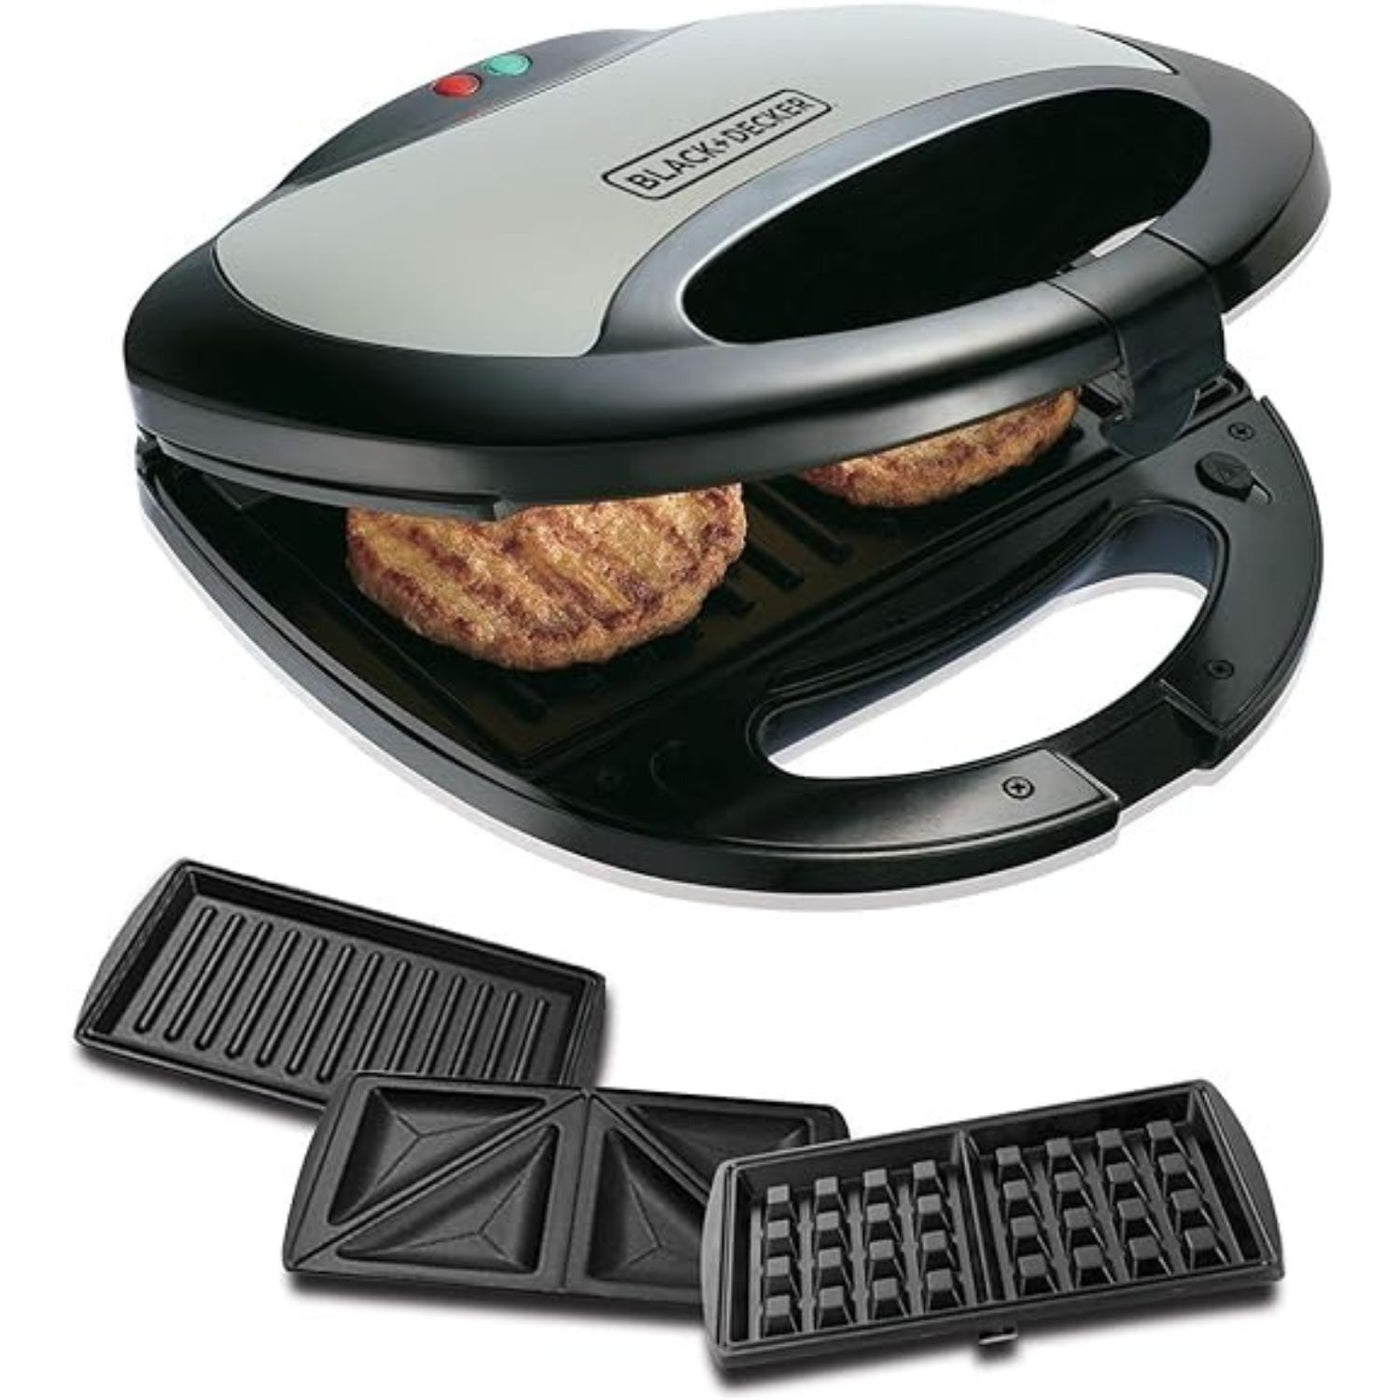 750w 3 In 1 Sandwich, Grill And Waffle Maker